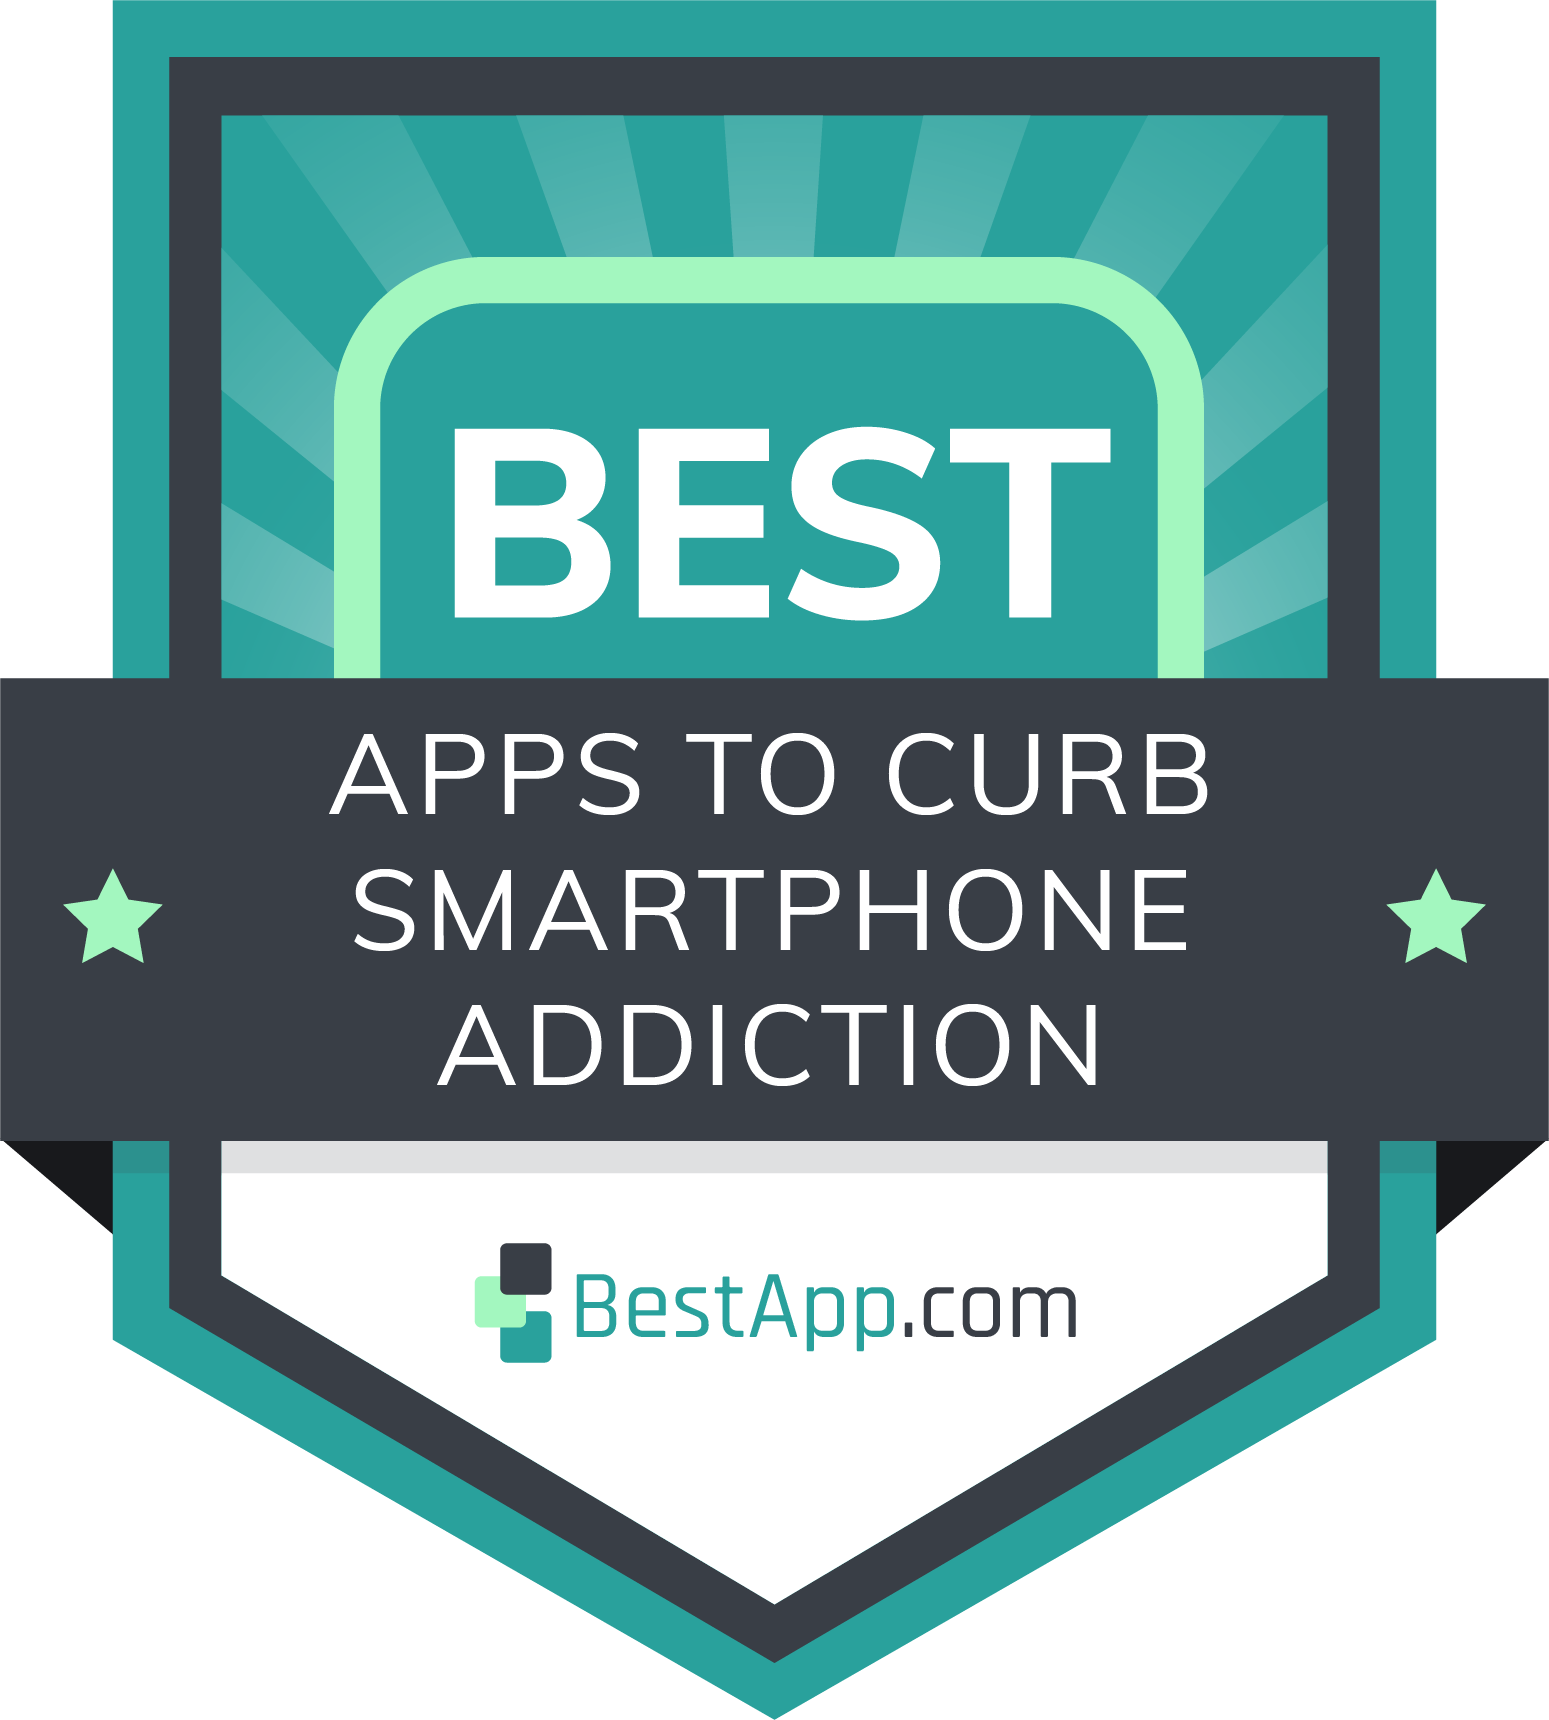 Best Apps to Curb Smartphone Addiction Badge